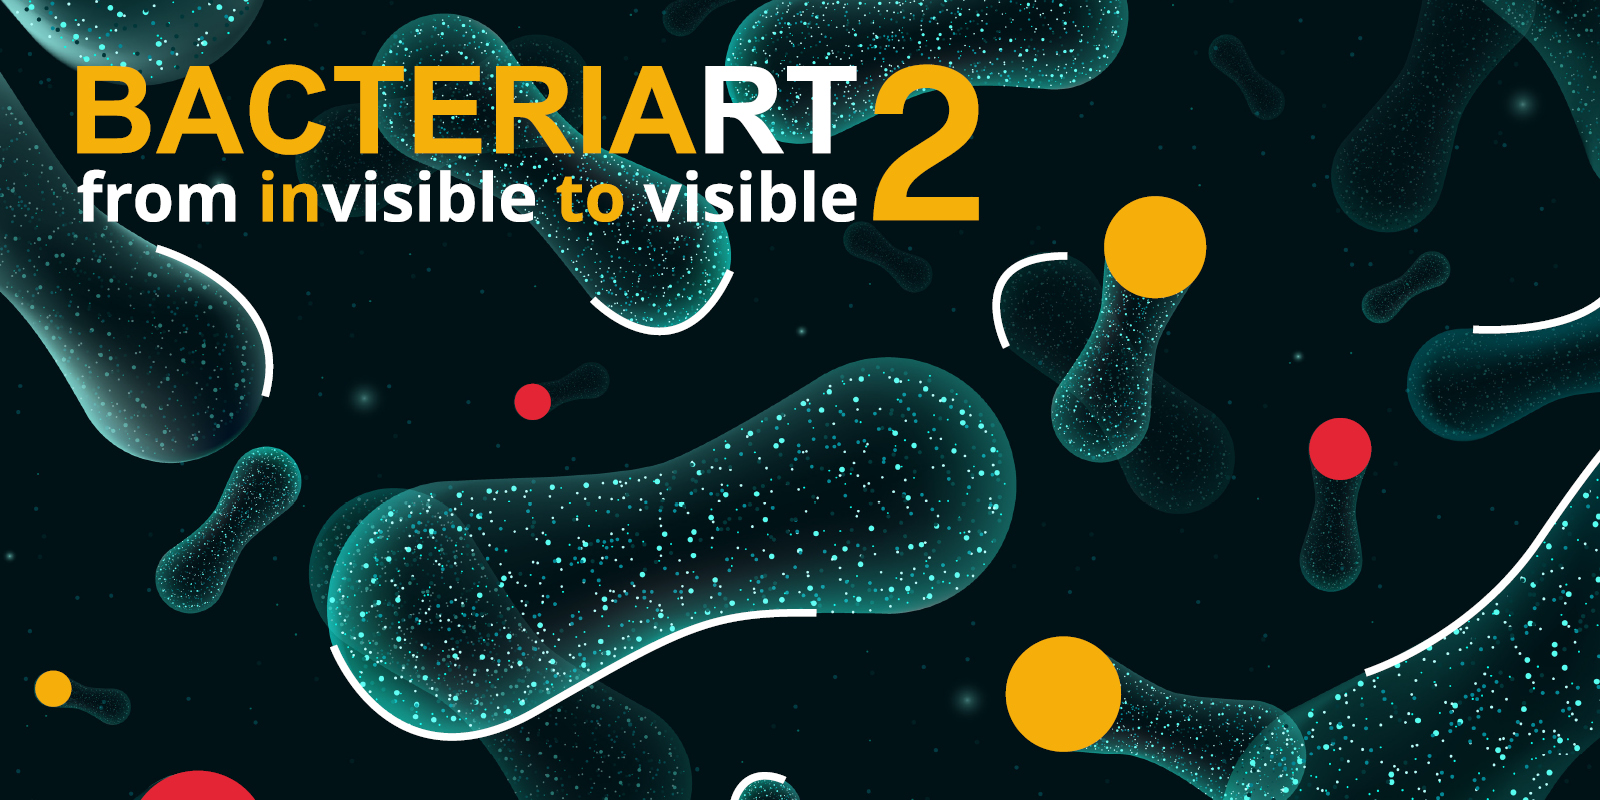 Bacteriart from invisible to visible